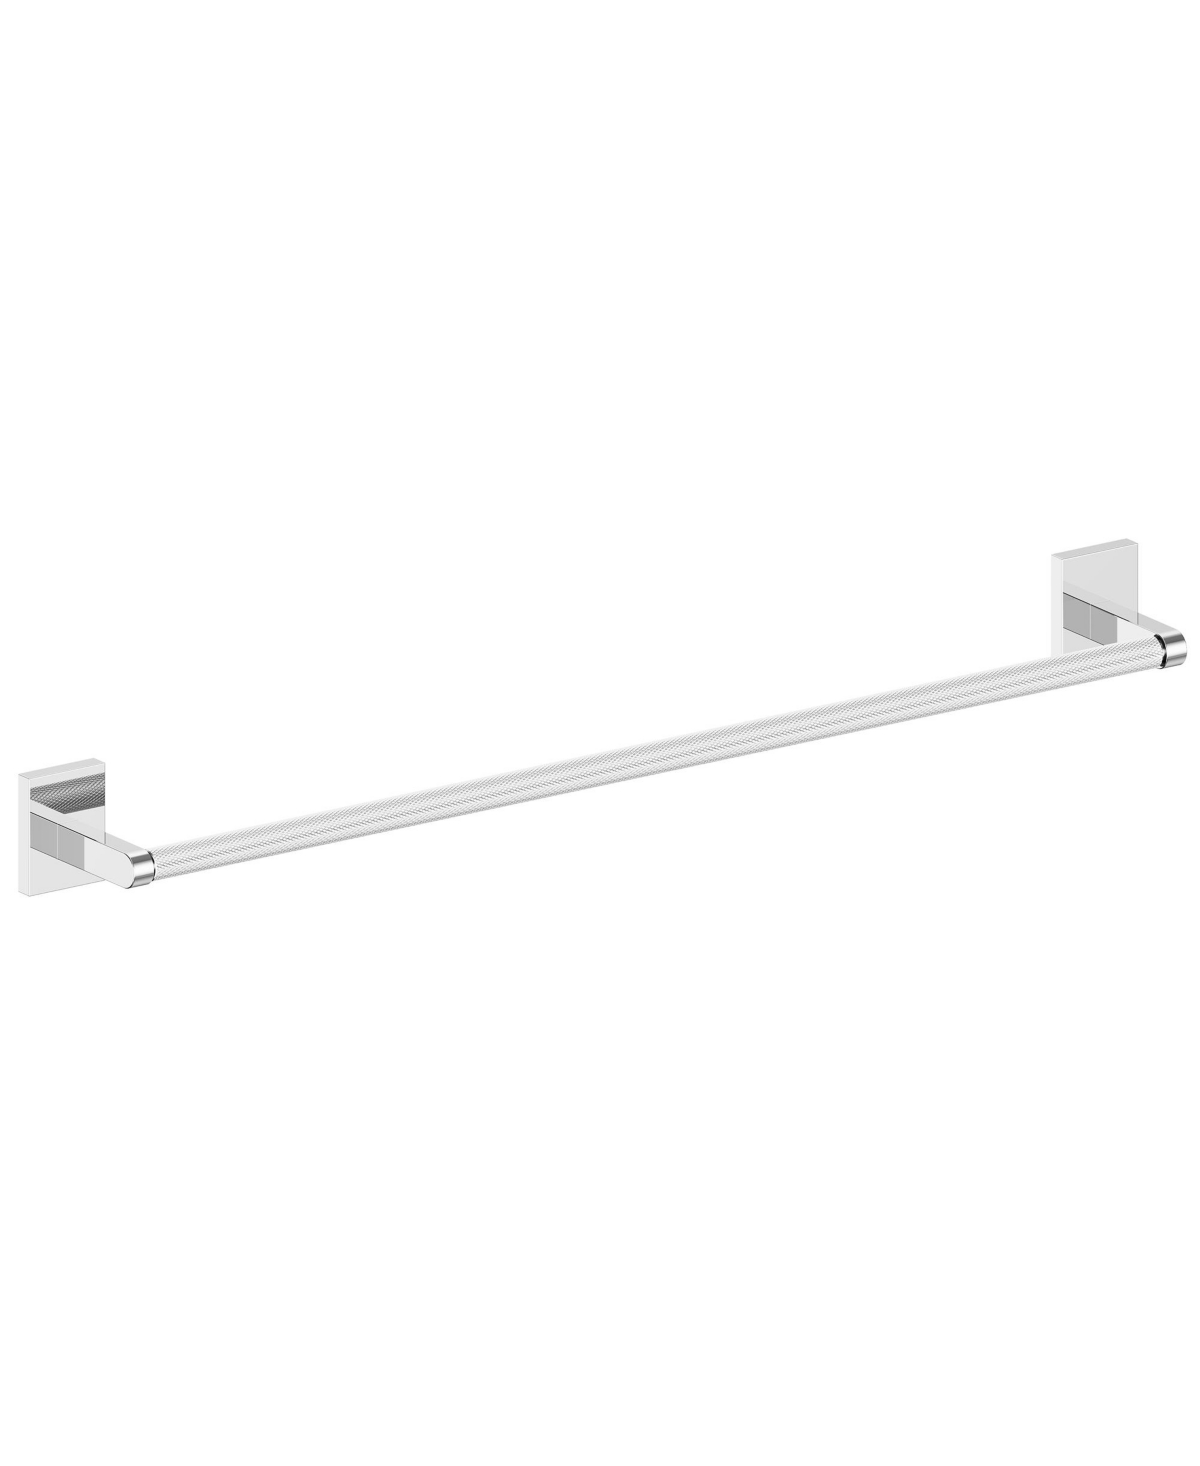 24 in. Towel Bar with Embossing in Chrome - Silver